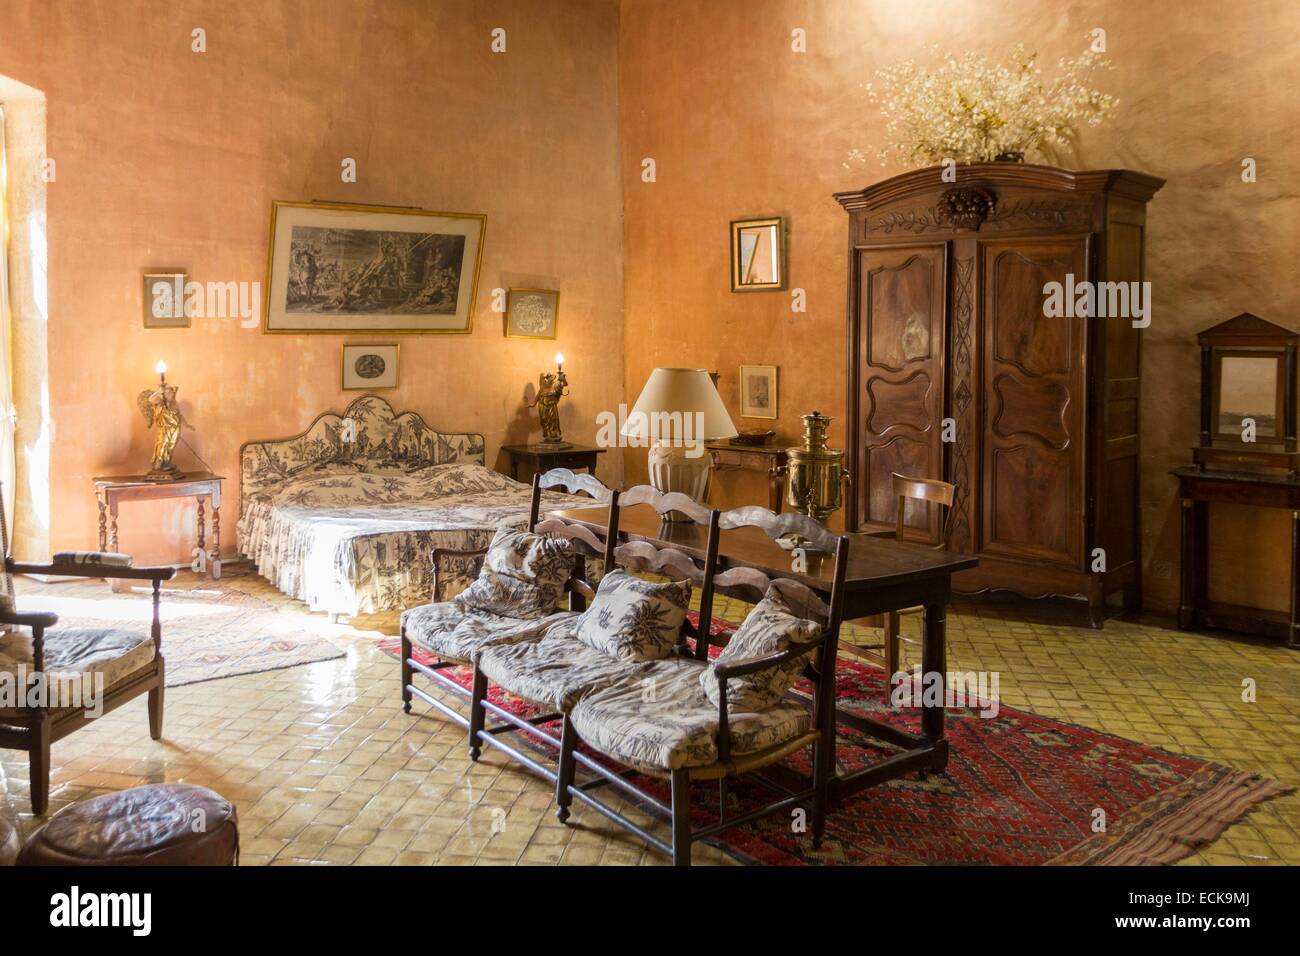 France, Vaucluse, Lourmarin, labeled Les Plus Beaux Villages de France (the Most Beautiful Villages of France), castle 15th and 16th centuries, classified as Historic Monument, the second room of Honor of Chateau Renaisance (1526 1567) proposes a reconstr Stock Photo